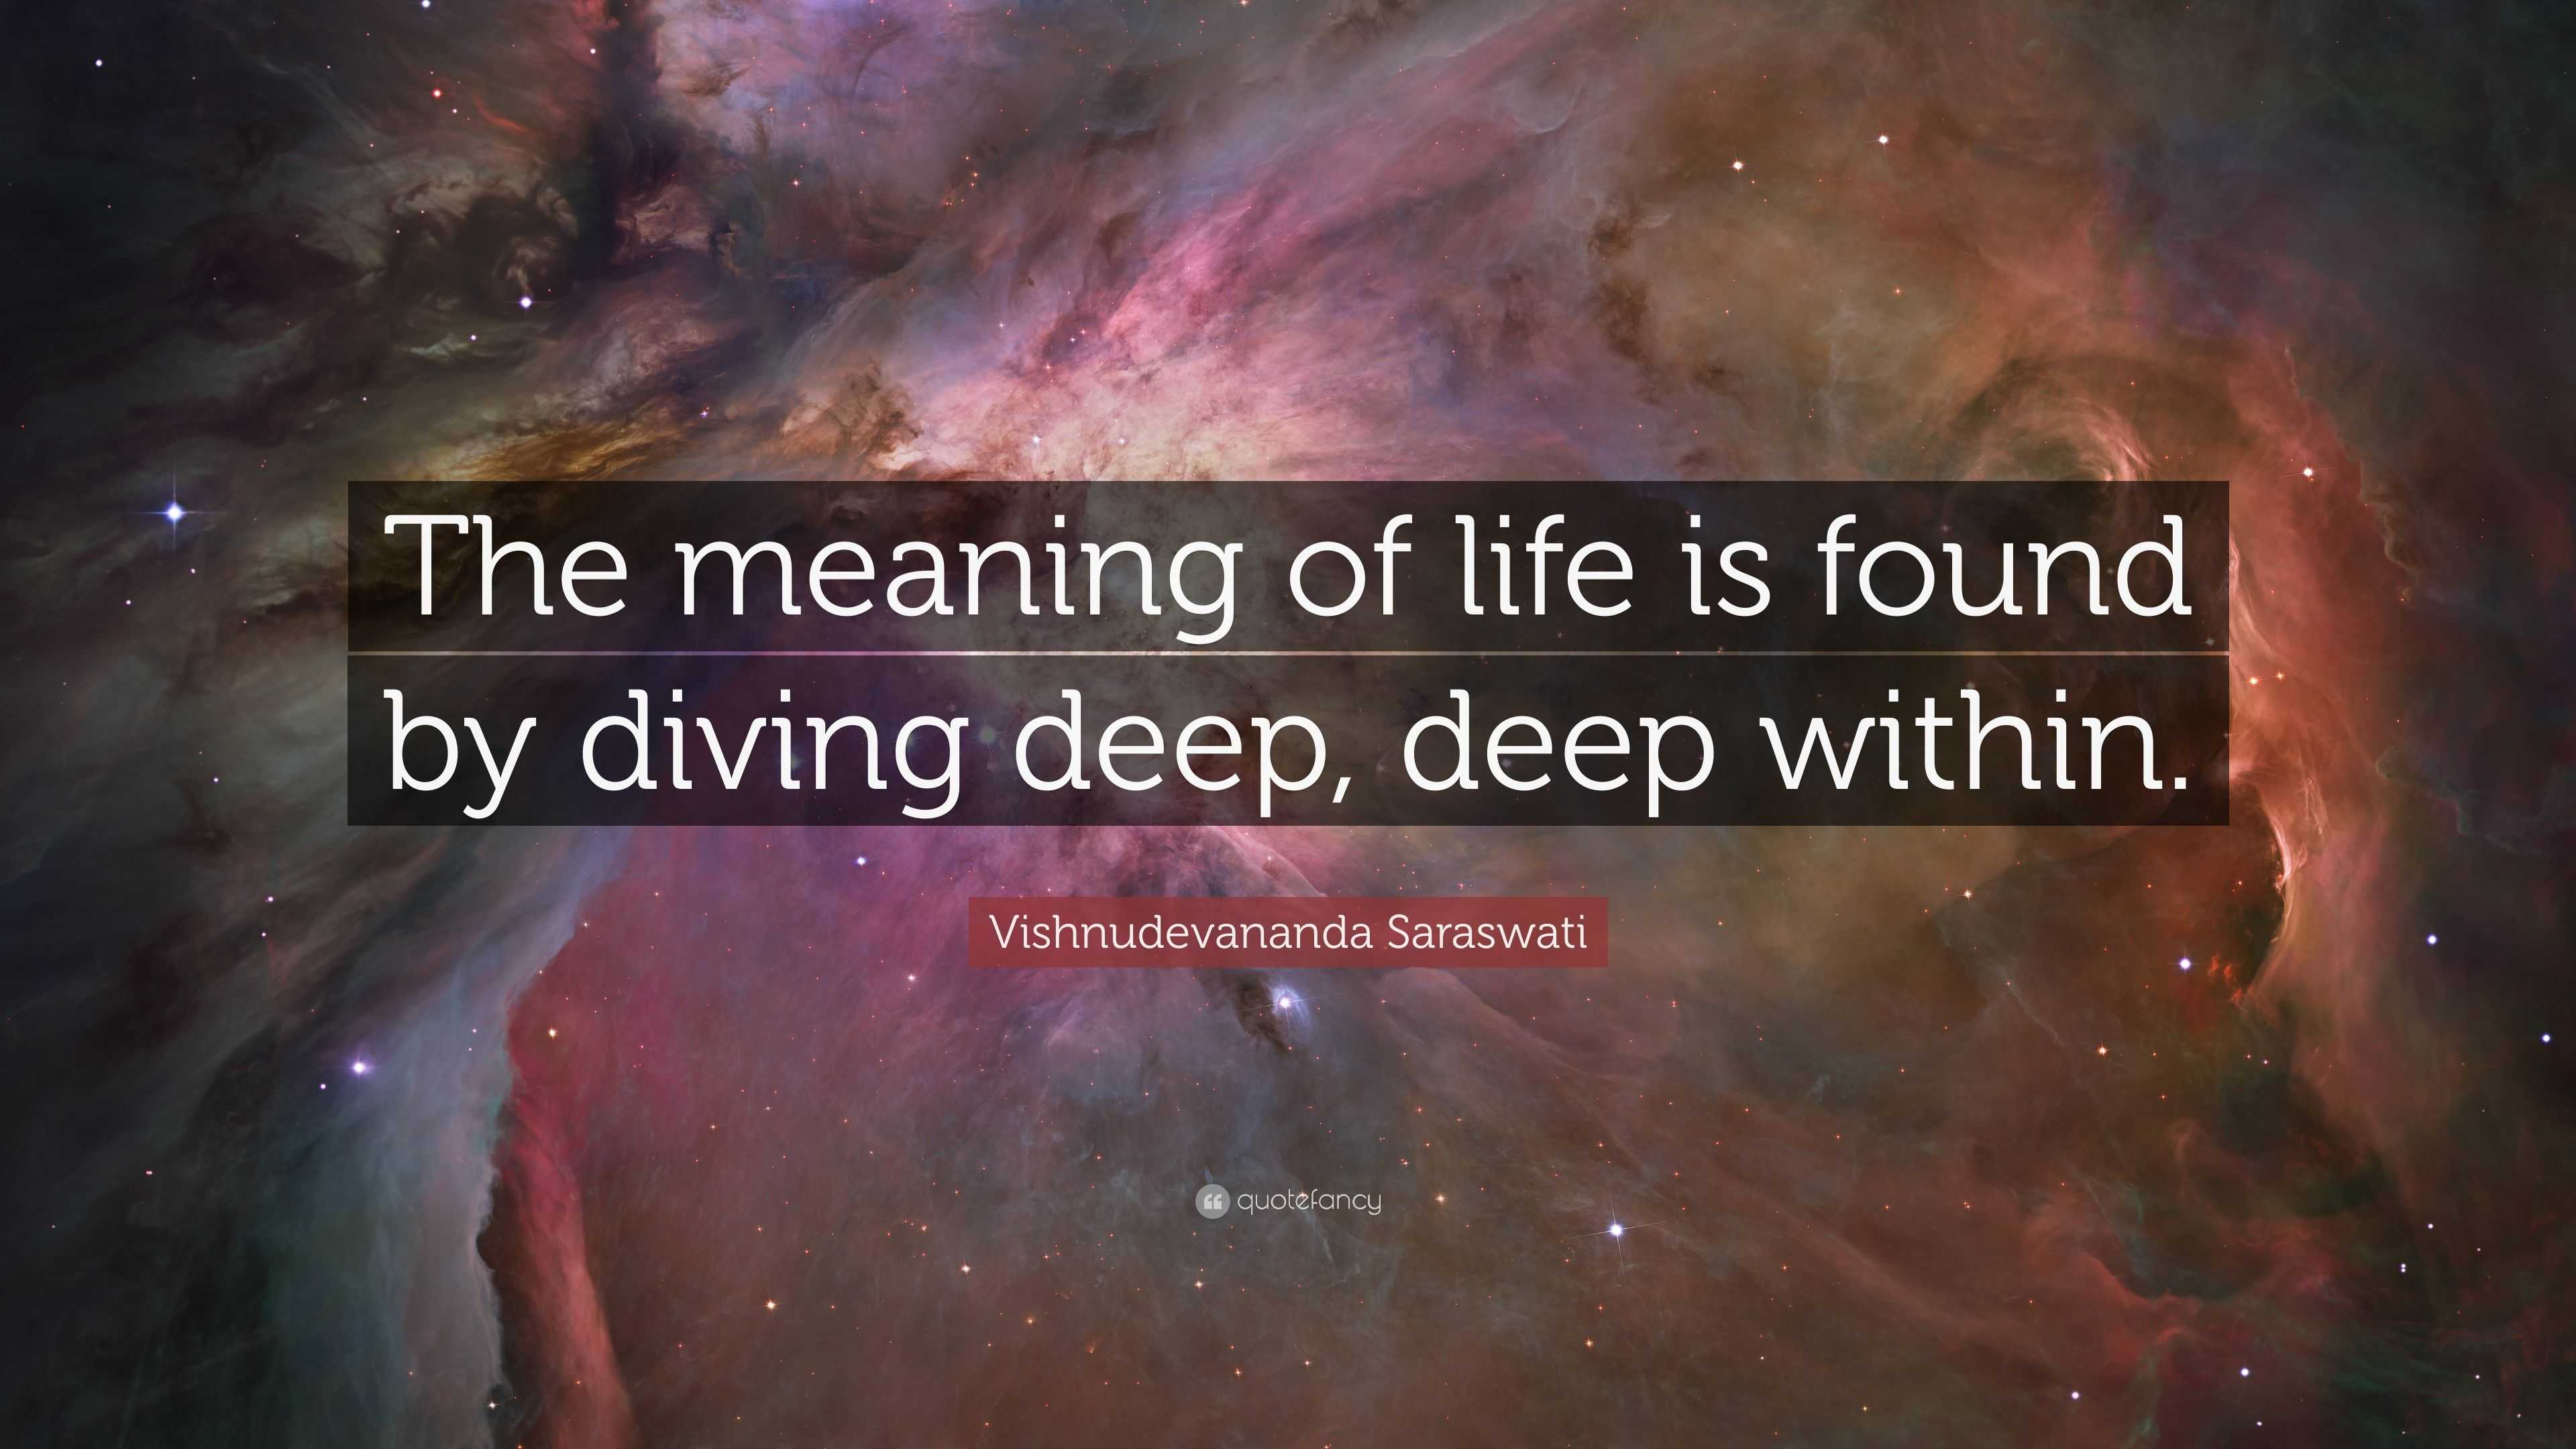 Vish vananda Saraswati Quote “The meaning of life is found by diving deep deep